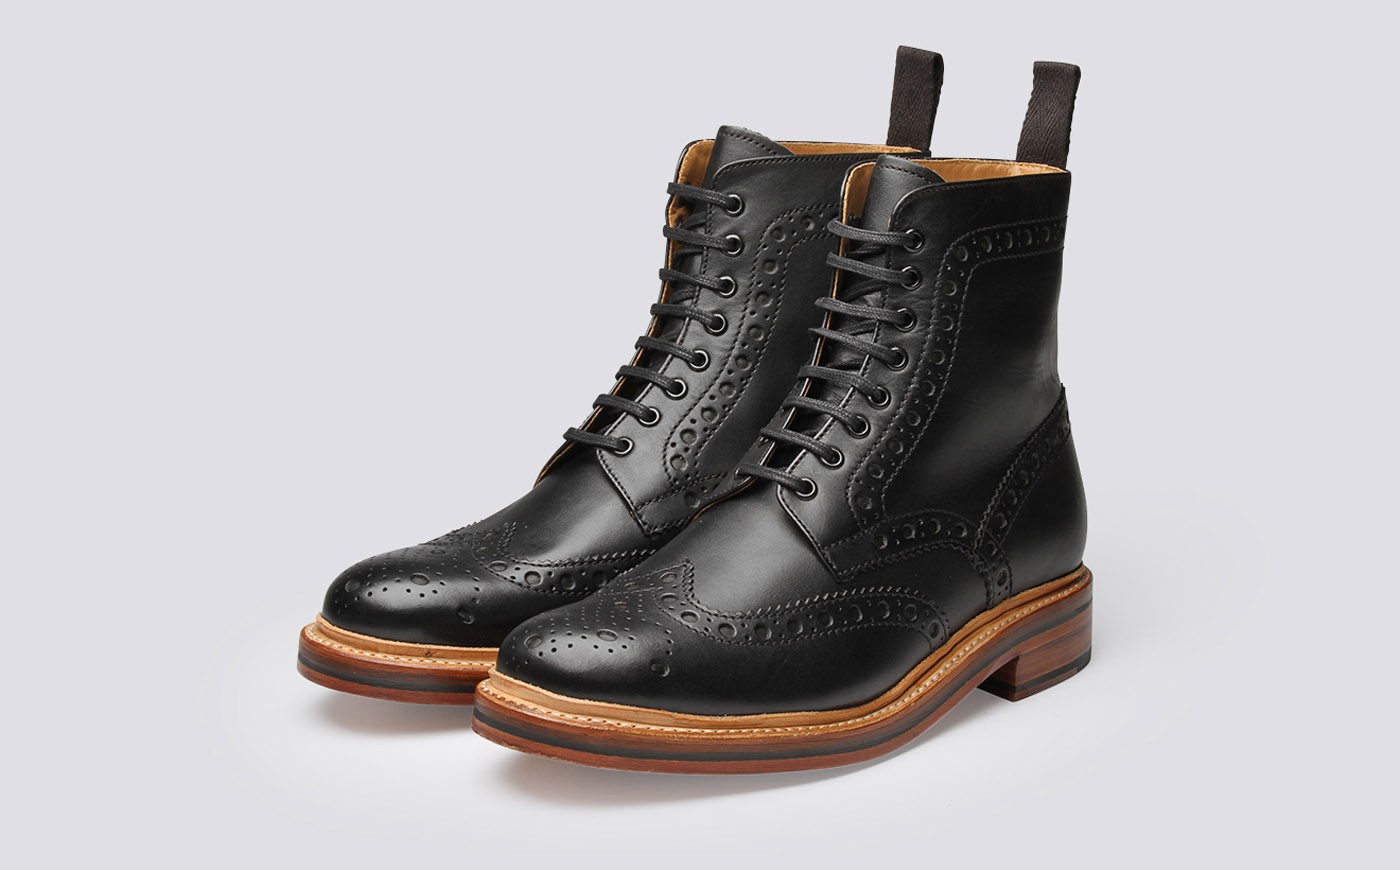 brogue boots grenson shoes u0026 accessories | fred mens brogue boot in black calf leather - jwqivkm